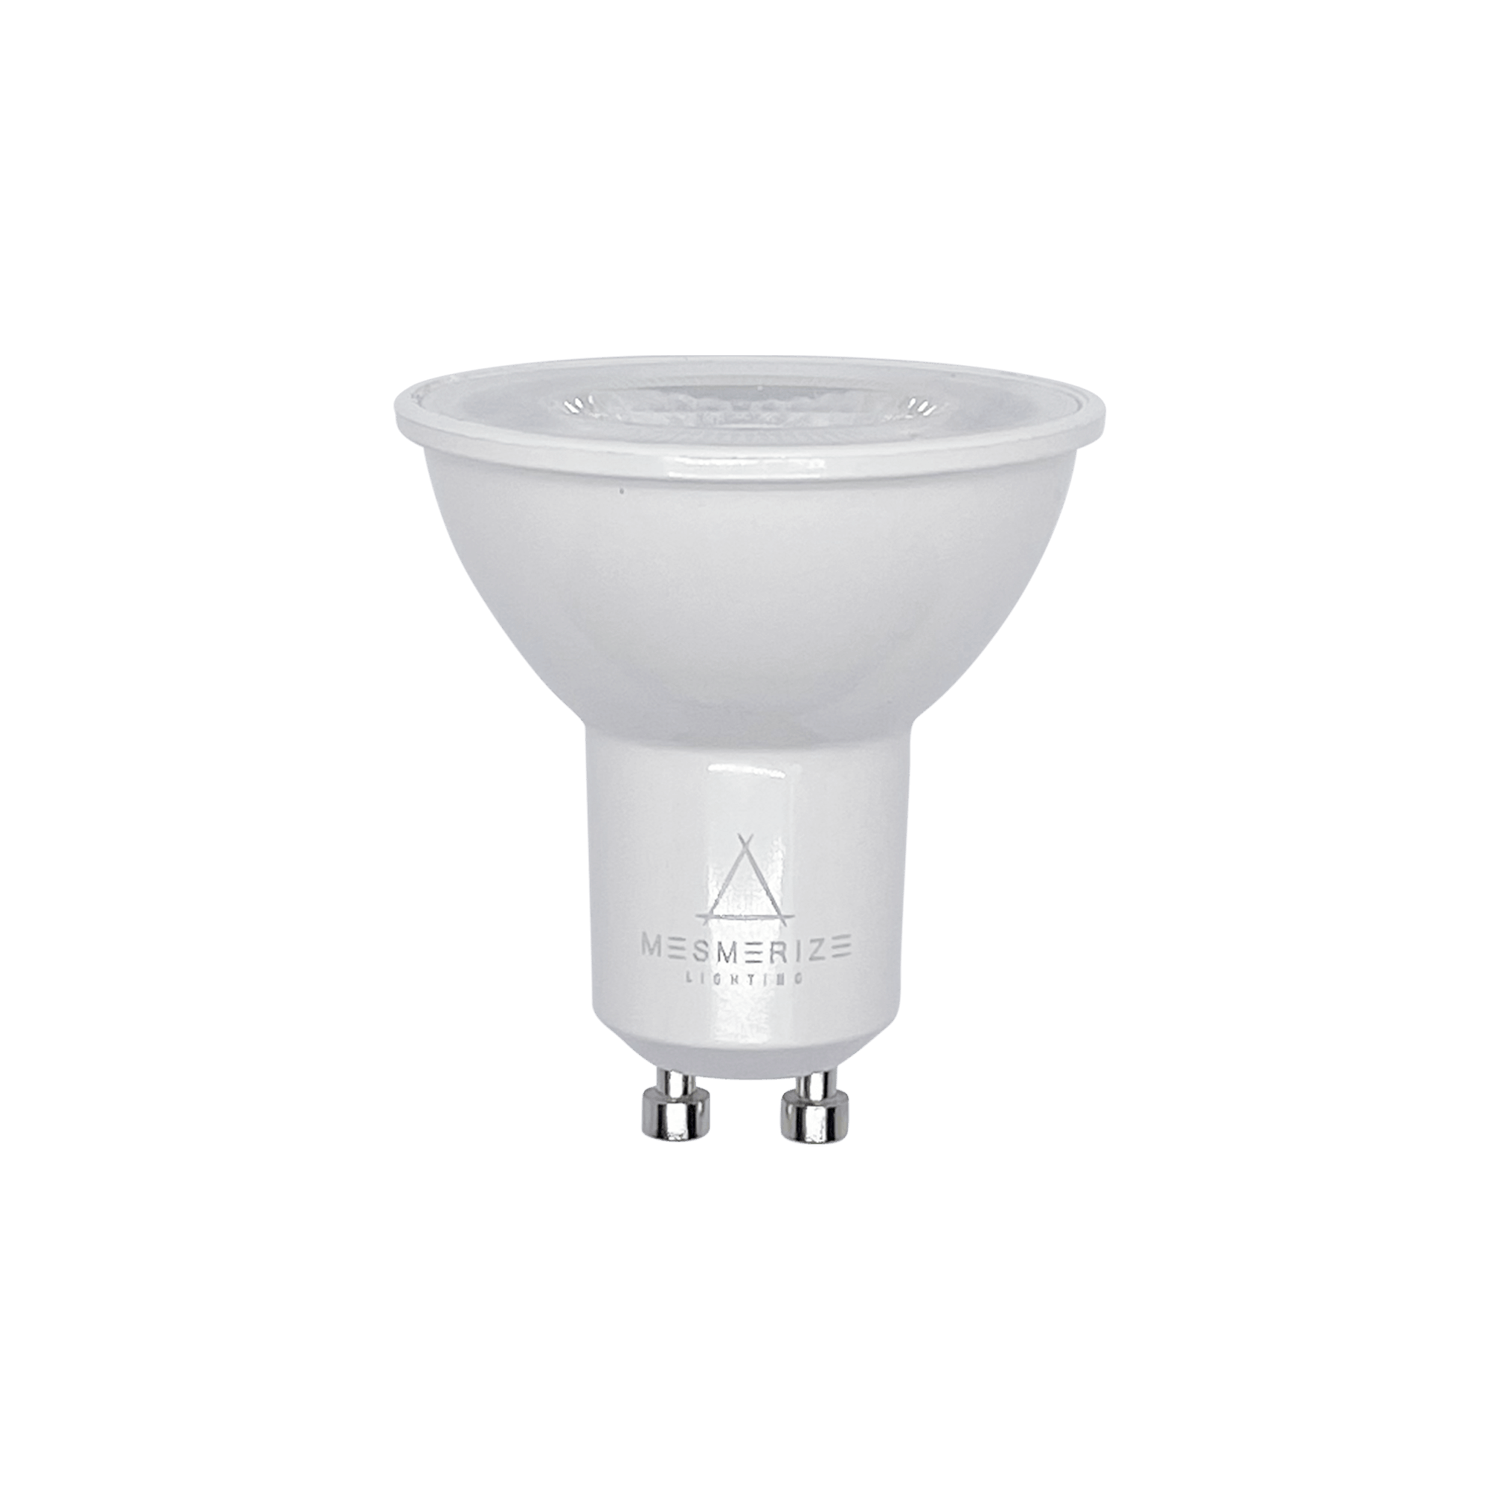 5.5W Warm White Dimmable Gu10 LED